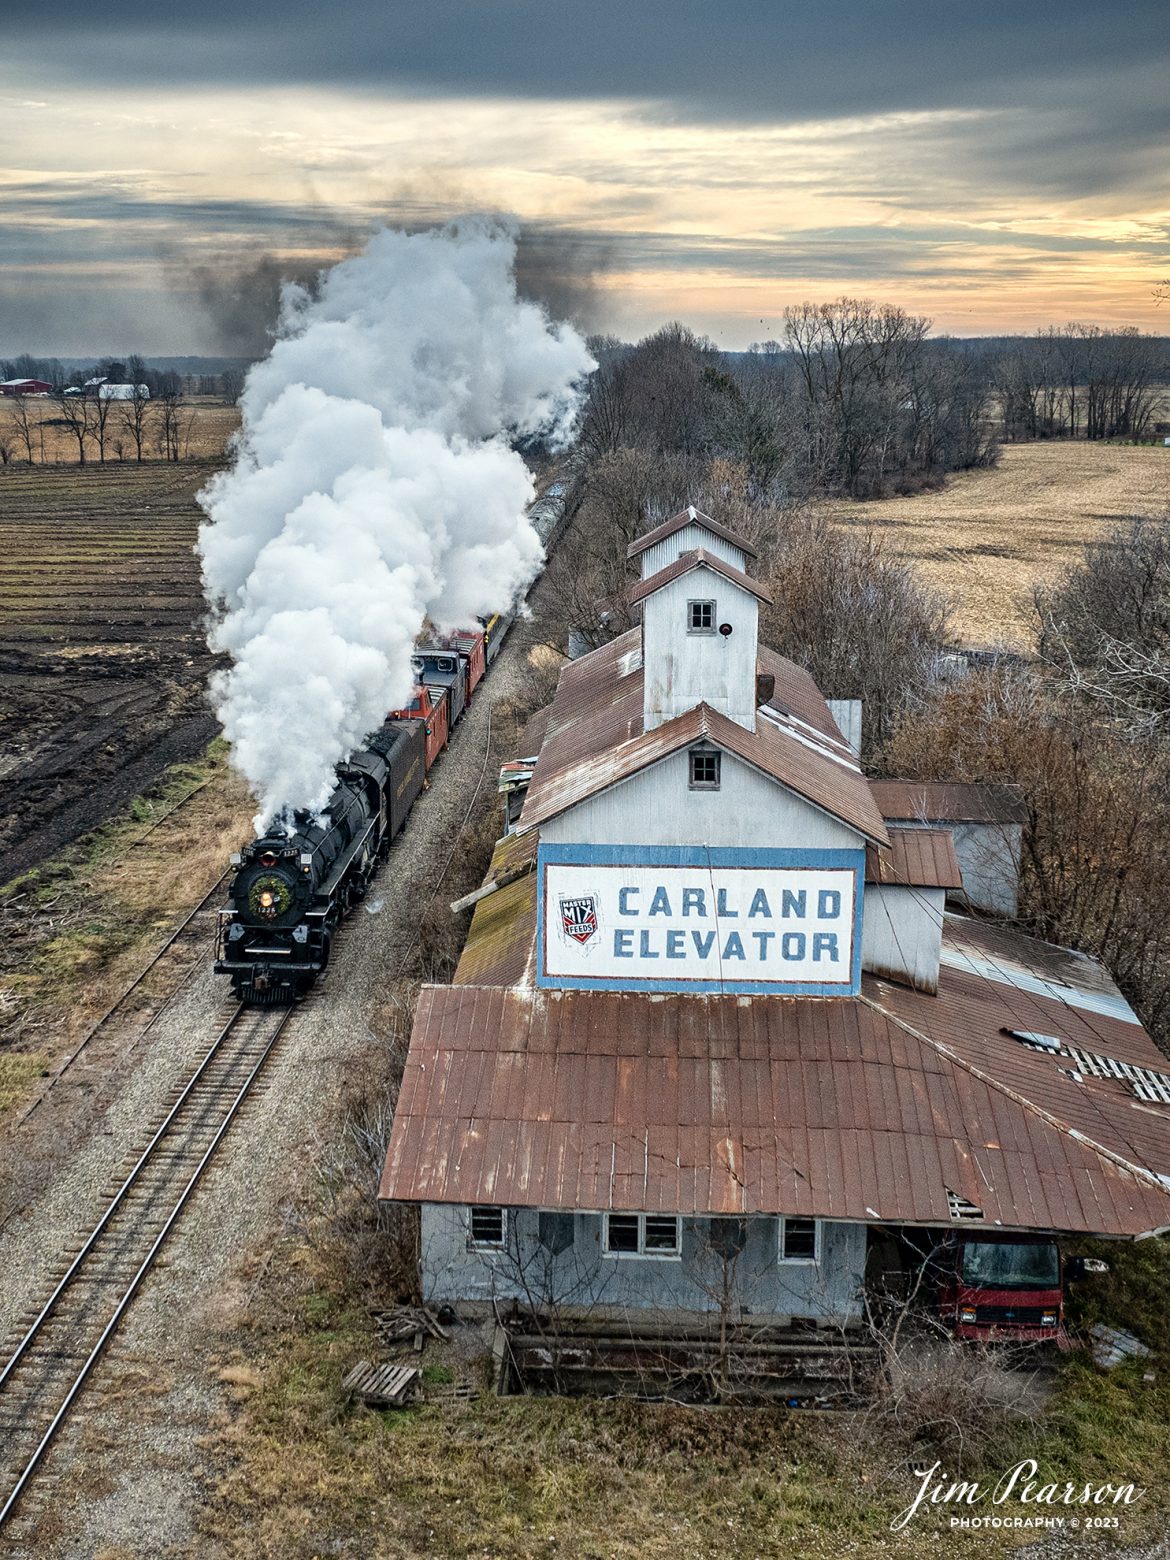 Steam Railroading Institute’s Pere Marquette 1225 passes the Carland Elevator at Carland, Michigan, as they run one of their last North Pole Express passenger train between Owosso and to the Village of Ashley, Michigan, for their Ashley Country Christmas, on December 16th, 2023. 

According to their website, Pere Marquette 1225, the largest and most impressive piece in the Steam Railroading Institute’s collection, is one of the largest operating steam locomotives in Michigan. The 1225 was built in October of 1941 by the Lima Locomotive Works in Lima, Ohio for the Pere Marquette Railway. It’s part of the National Register of Historic Structures and is renowned for its role in the 2004 Warner Brothers Christmas Classic, THE POLAR EXPRESS™. 1225’s blueprints were used as the prototype for the locomotive image as well as its sounds to bring the train in the animated film to life!

Tech Info: DJI Mavic 3 Classic Drone, RAW, 22mm, f/2.8, 1/1250, ISO 260.

#railroad #railroads #train #trains #bestphoto #railroadengines #picturesoftrains #picturesofrailway #bestphotograph #photographyoftrains #trainphotography #JimPearsonPhotography #steamtrains #trending